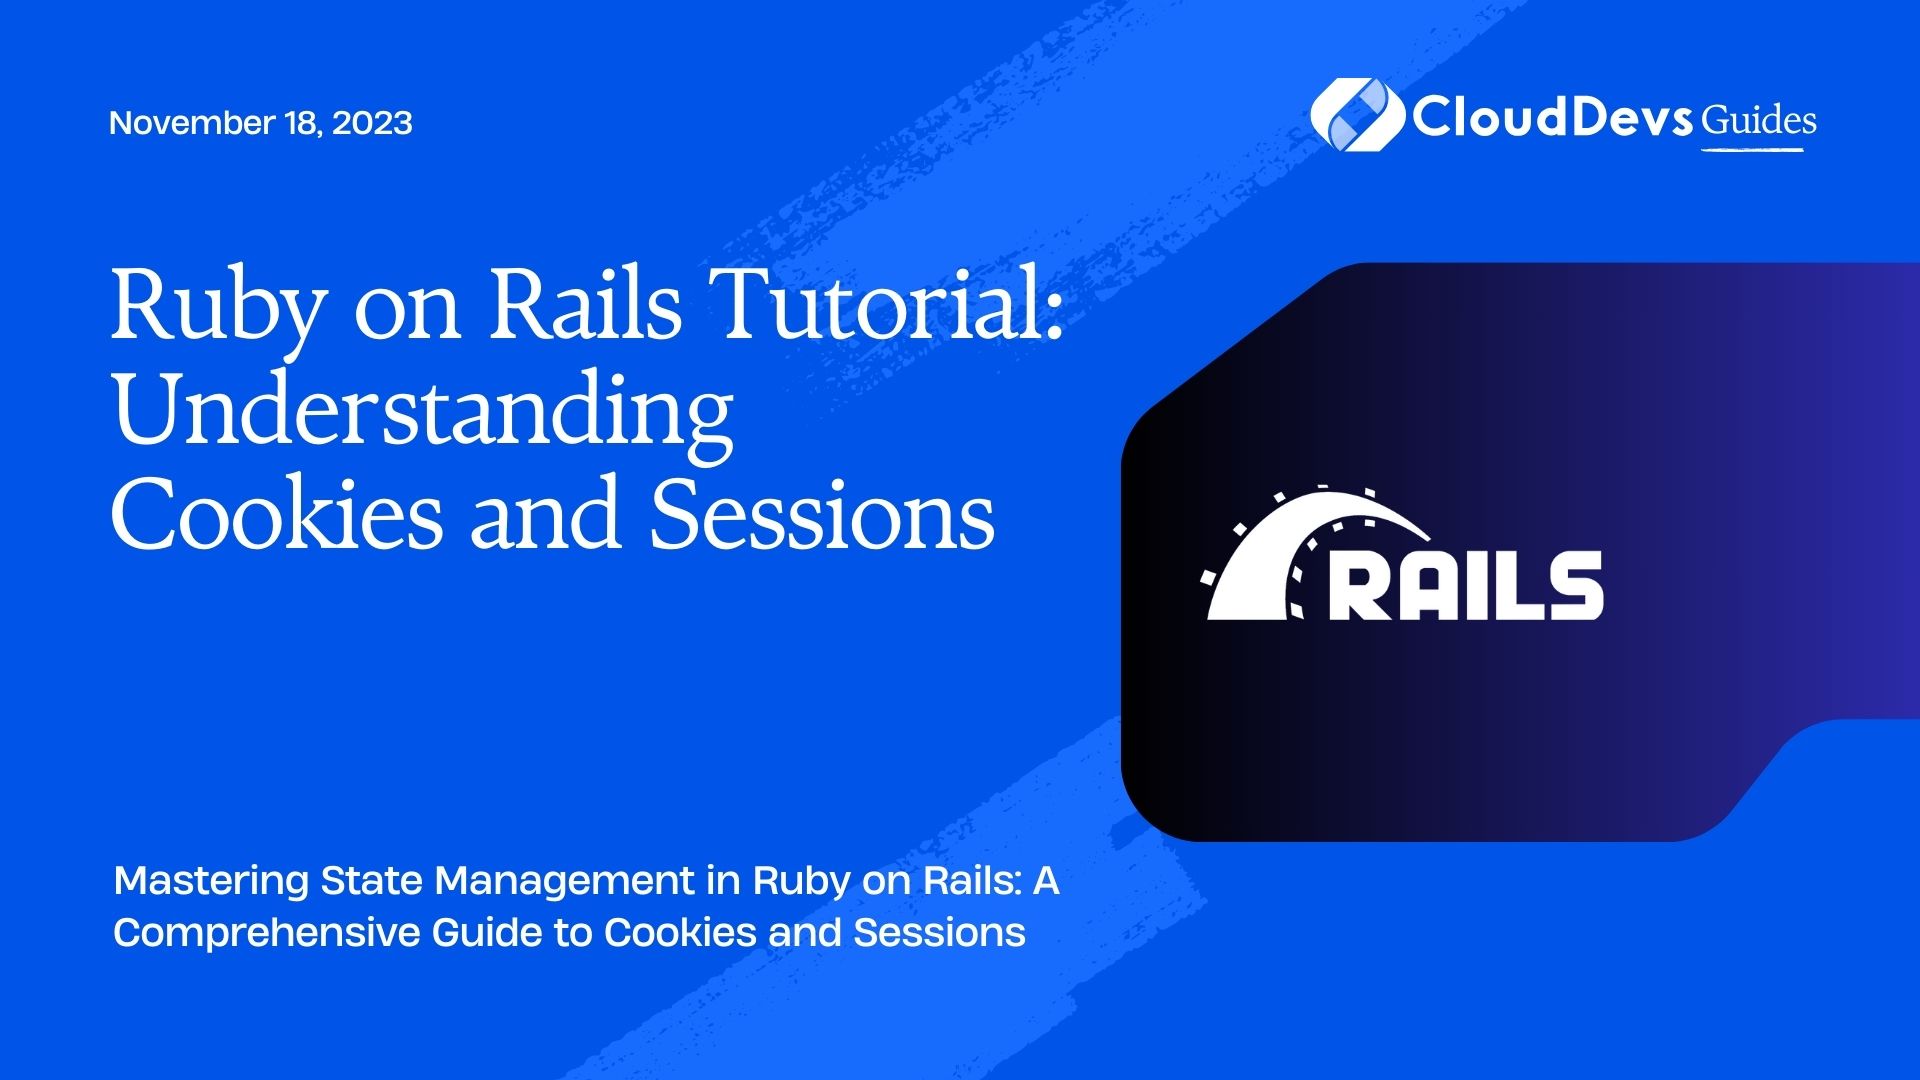 Ruby on Rails Tutorial: Understanding Cookies and Sessions